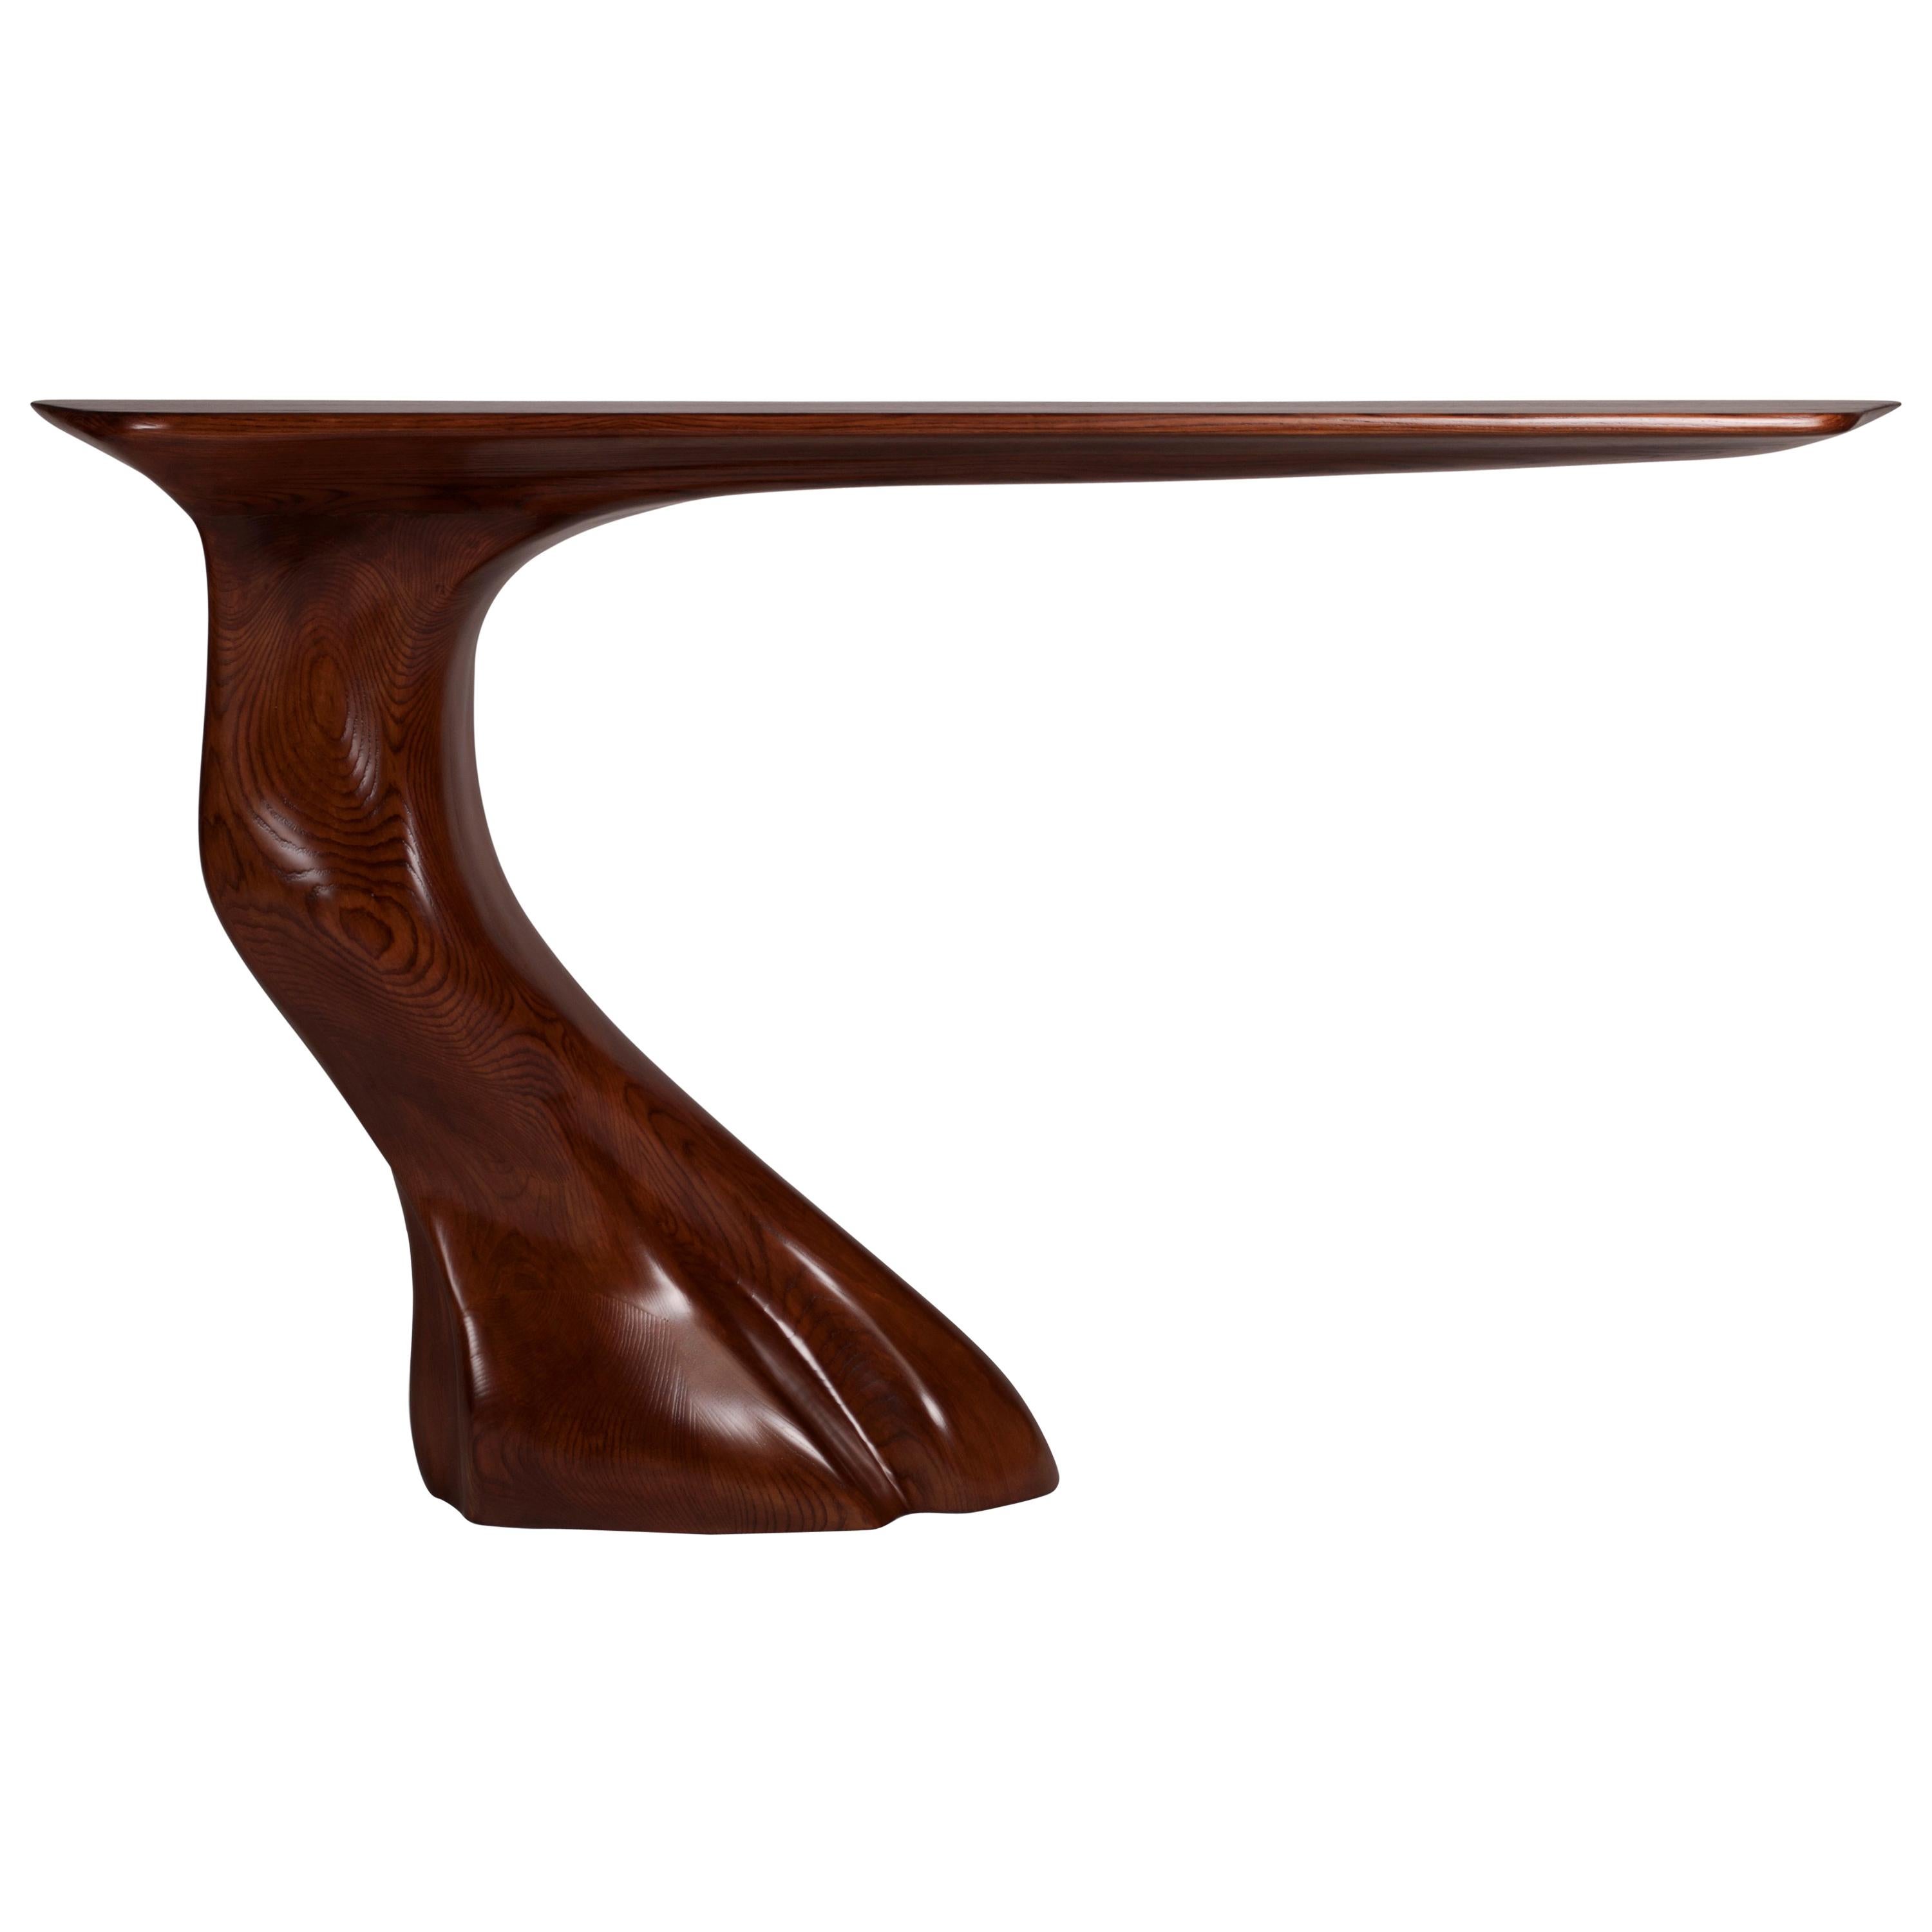 Amorph Frolic wall mounted console table in Walnut stain on Ash wood For Sale